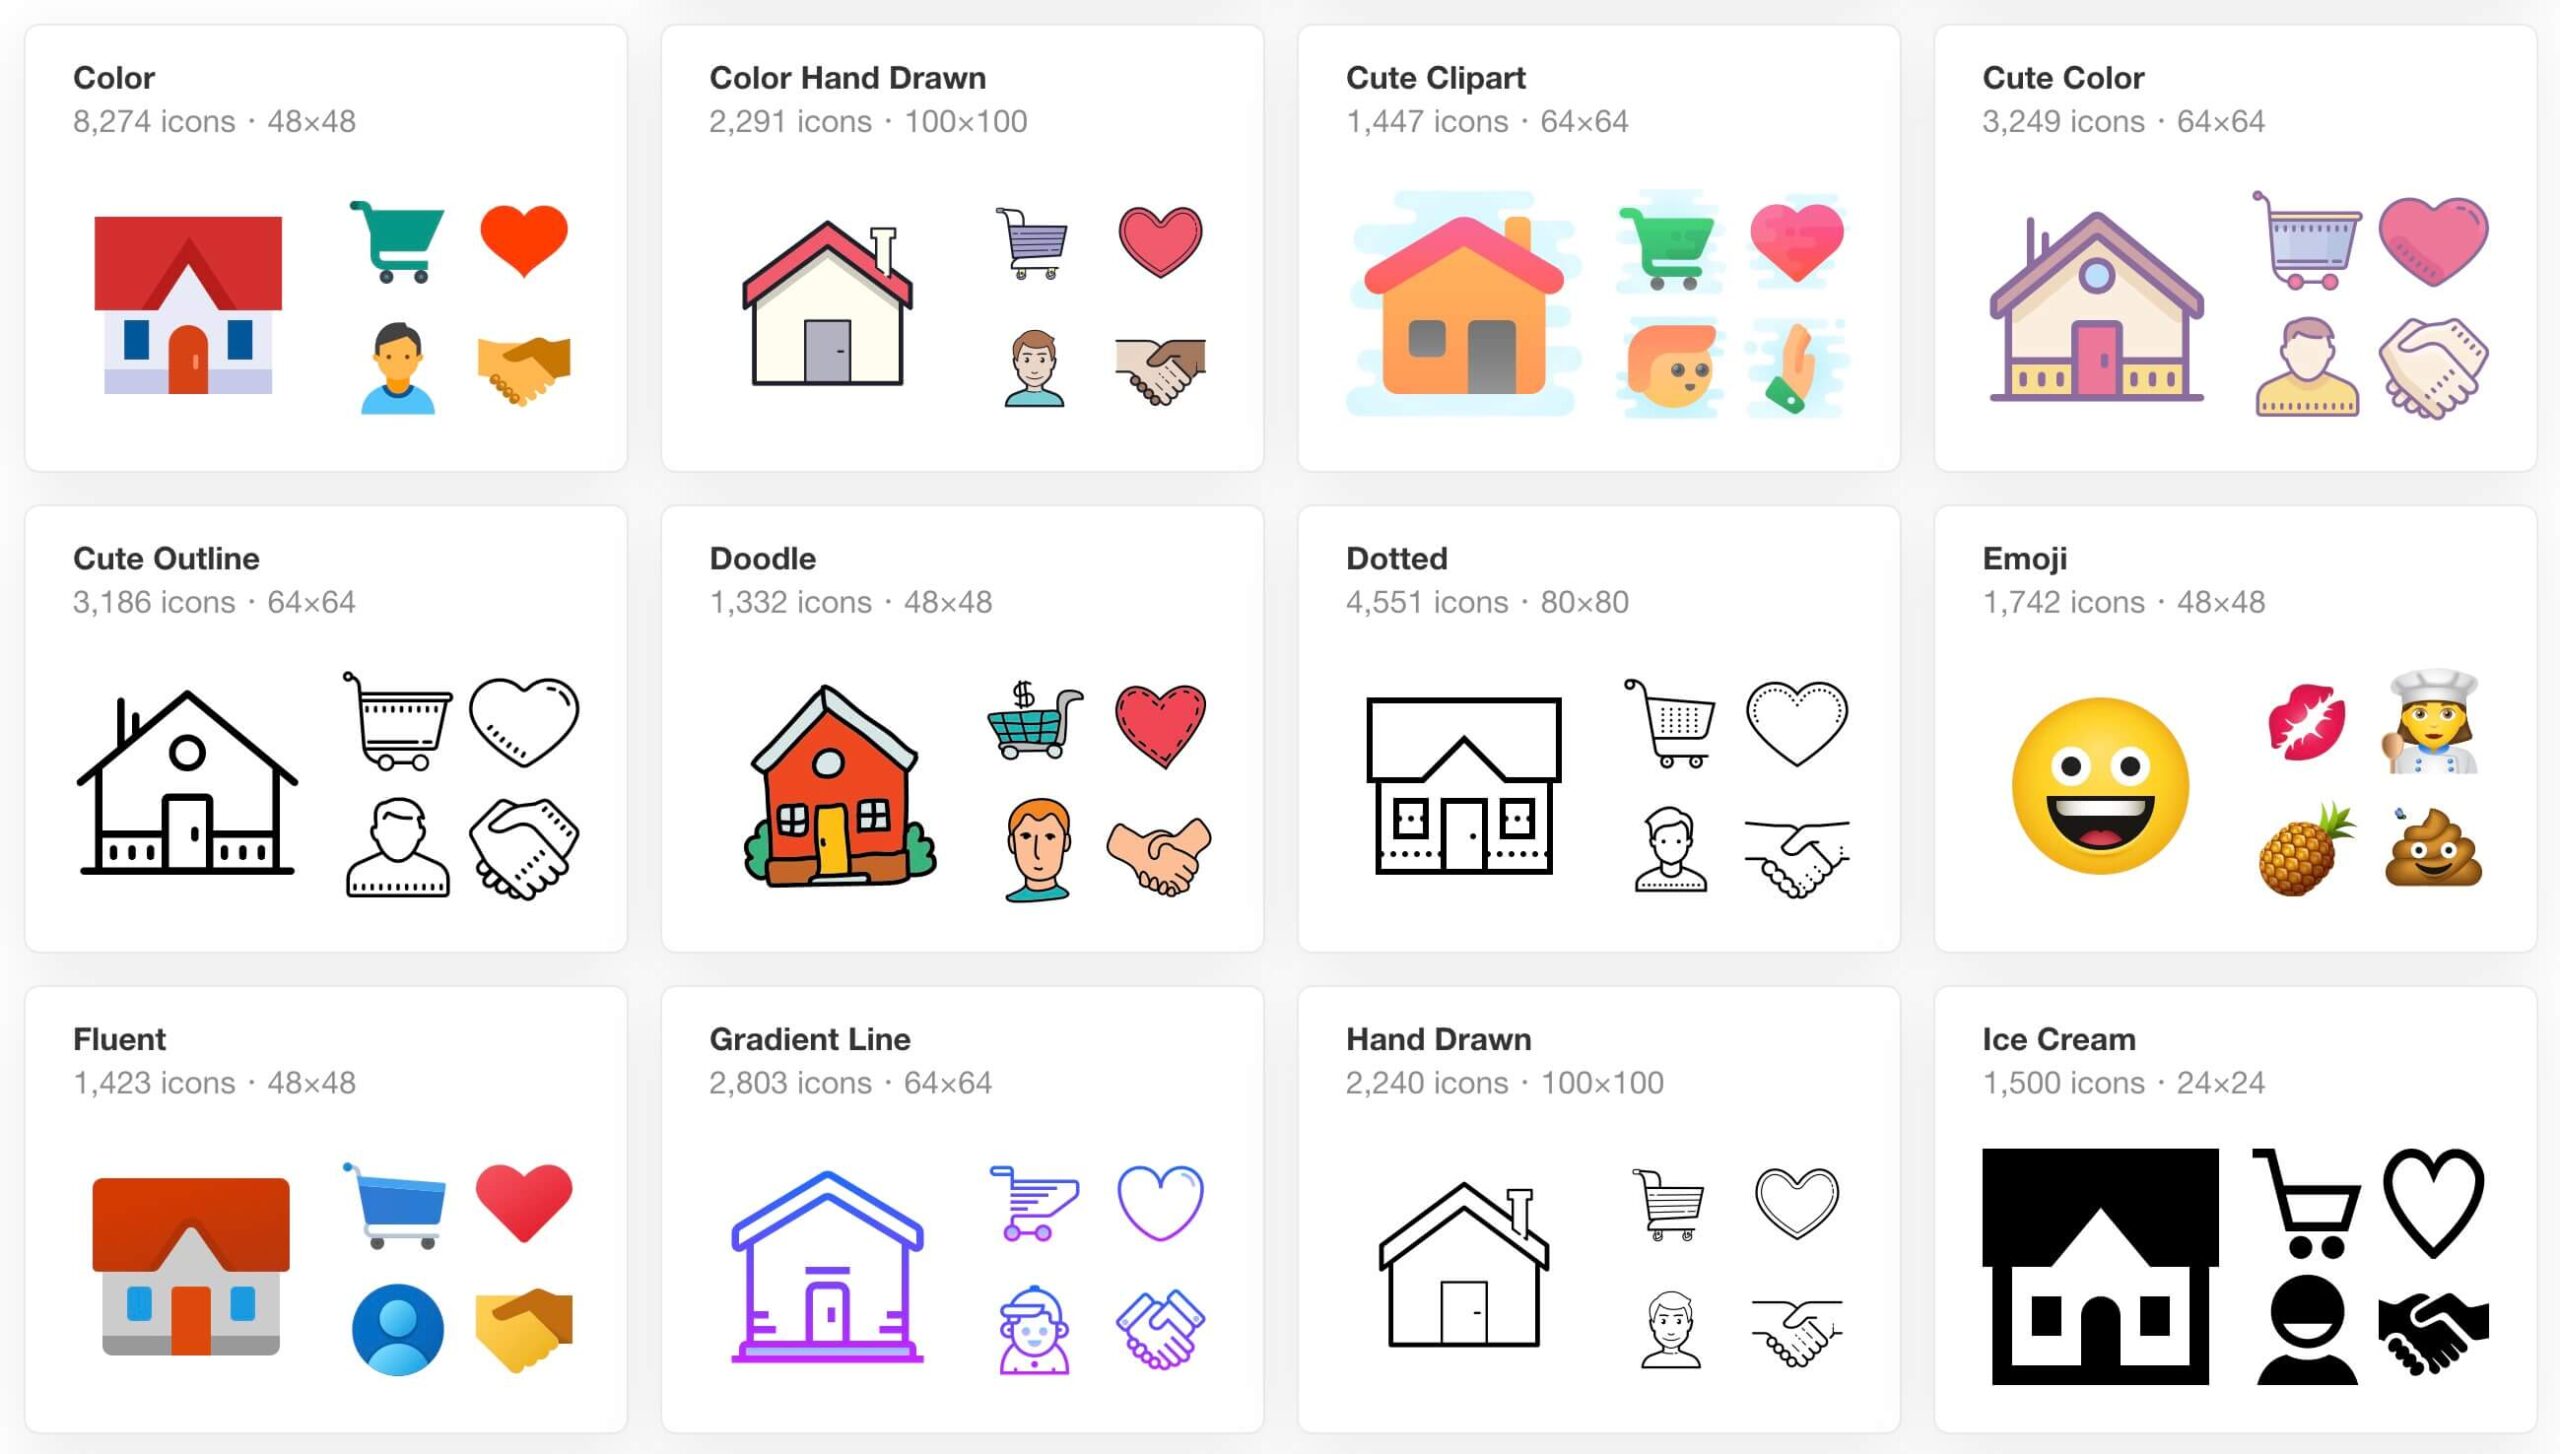 10 Awesome Websites for FREE SVG Icons to use on your Next Project